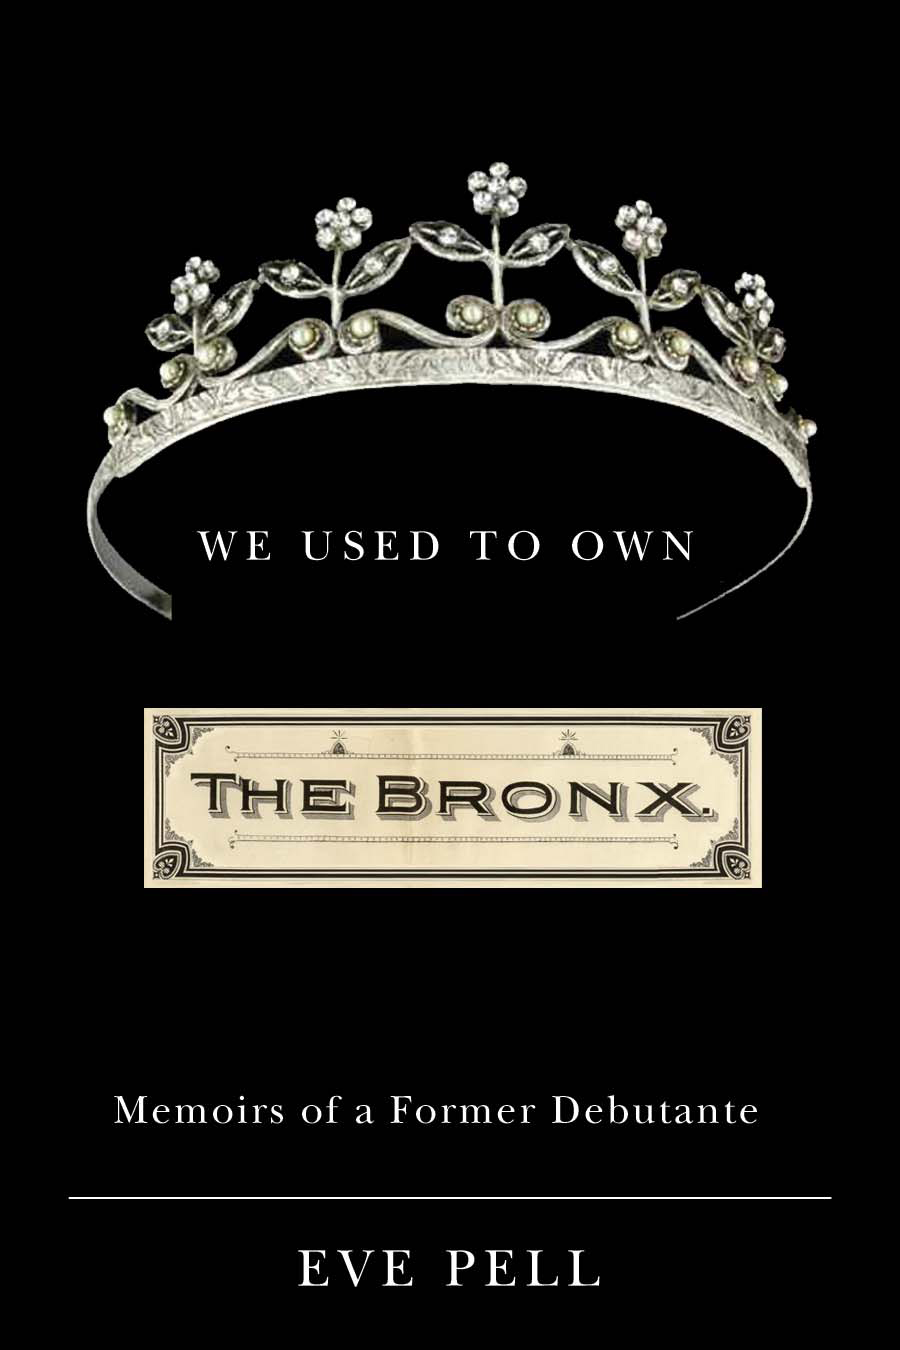 We Used To Own The Bronx by Eve Pell.